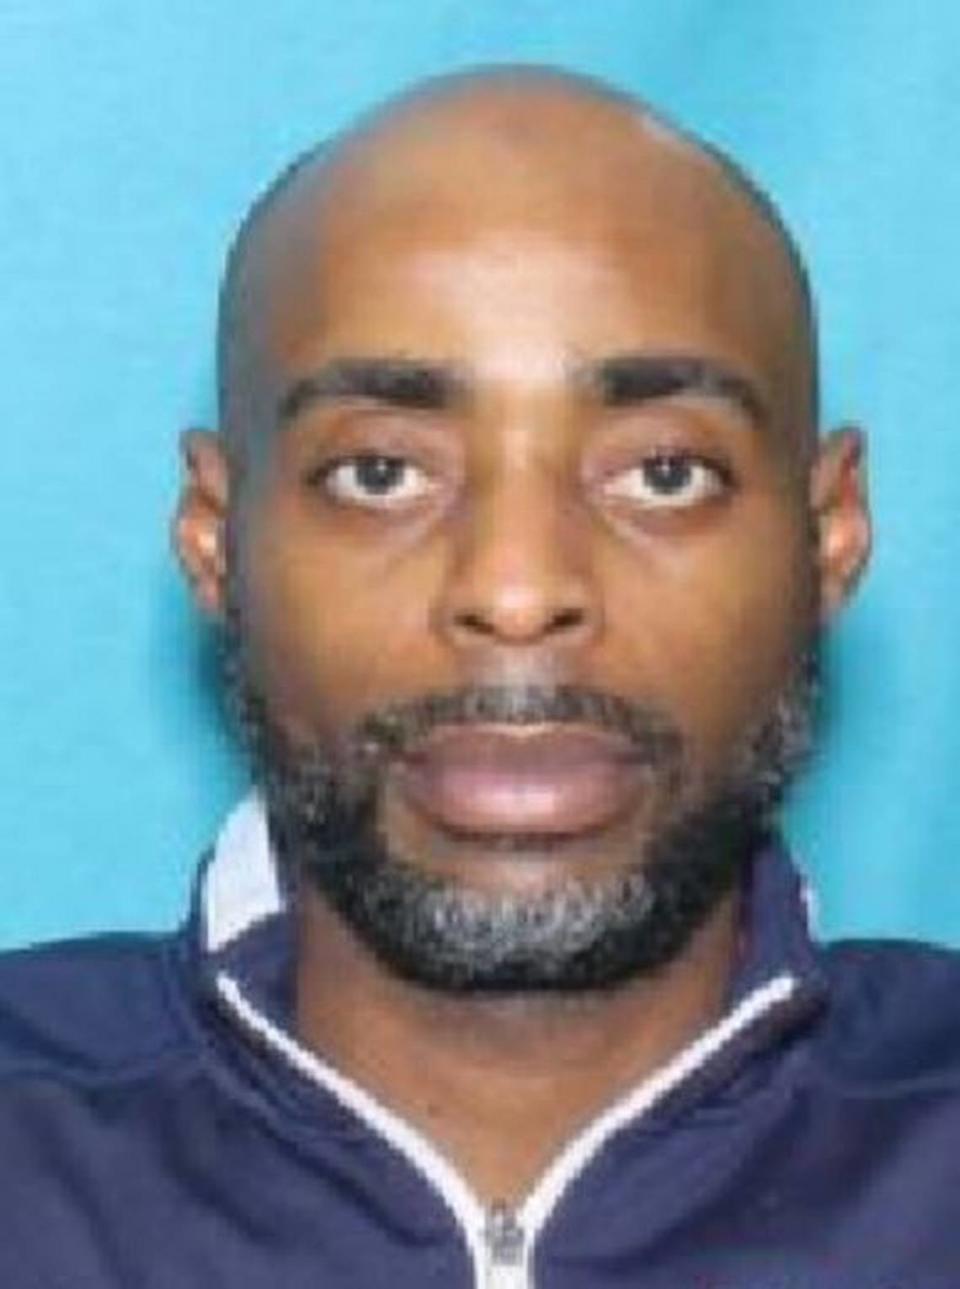 Barney Dale Harris was involved in a shooting on Thursday, April 8, 2021 in Green Level, NC. He was pronounced dead at the scene